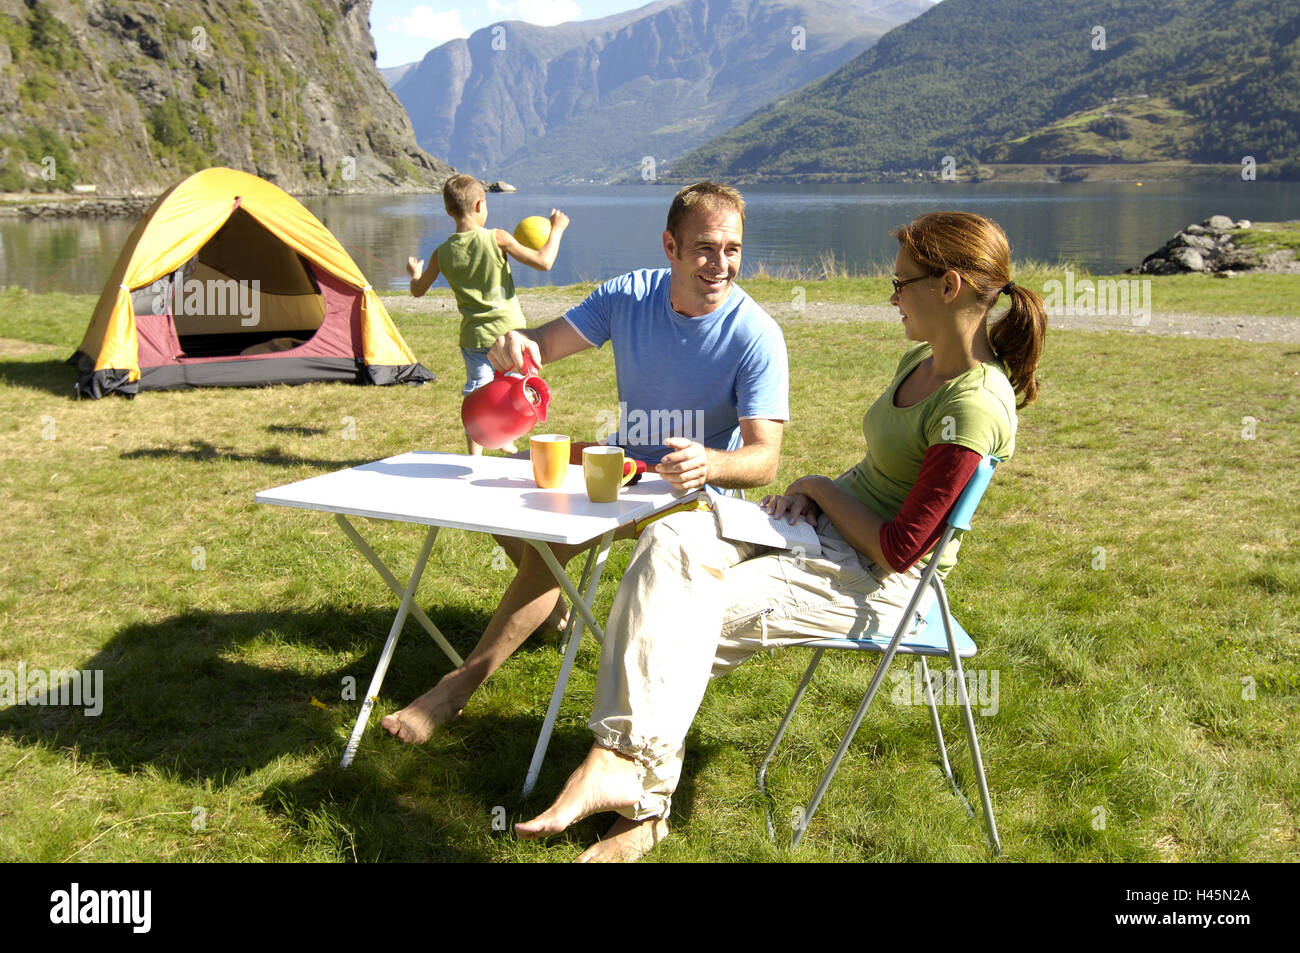 Norway, mountain lake, shore, family, camping, cheerfully, series, mountain scenery, lake, fjord, fjord-country, Aurlandsfjord, people, child, plays camping boy, ball, parents, camping-table folding chairs laughs, joy, happily, fun joy adventures leisure time vacation, vacation, family-vacation, family-trip, family-luck, family-lives, harmony, camping-vacation, Stock Photo